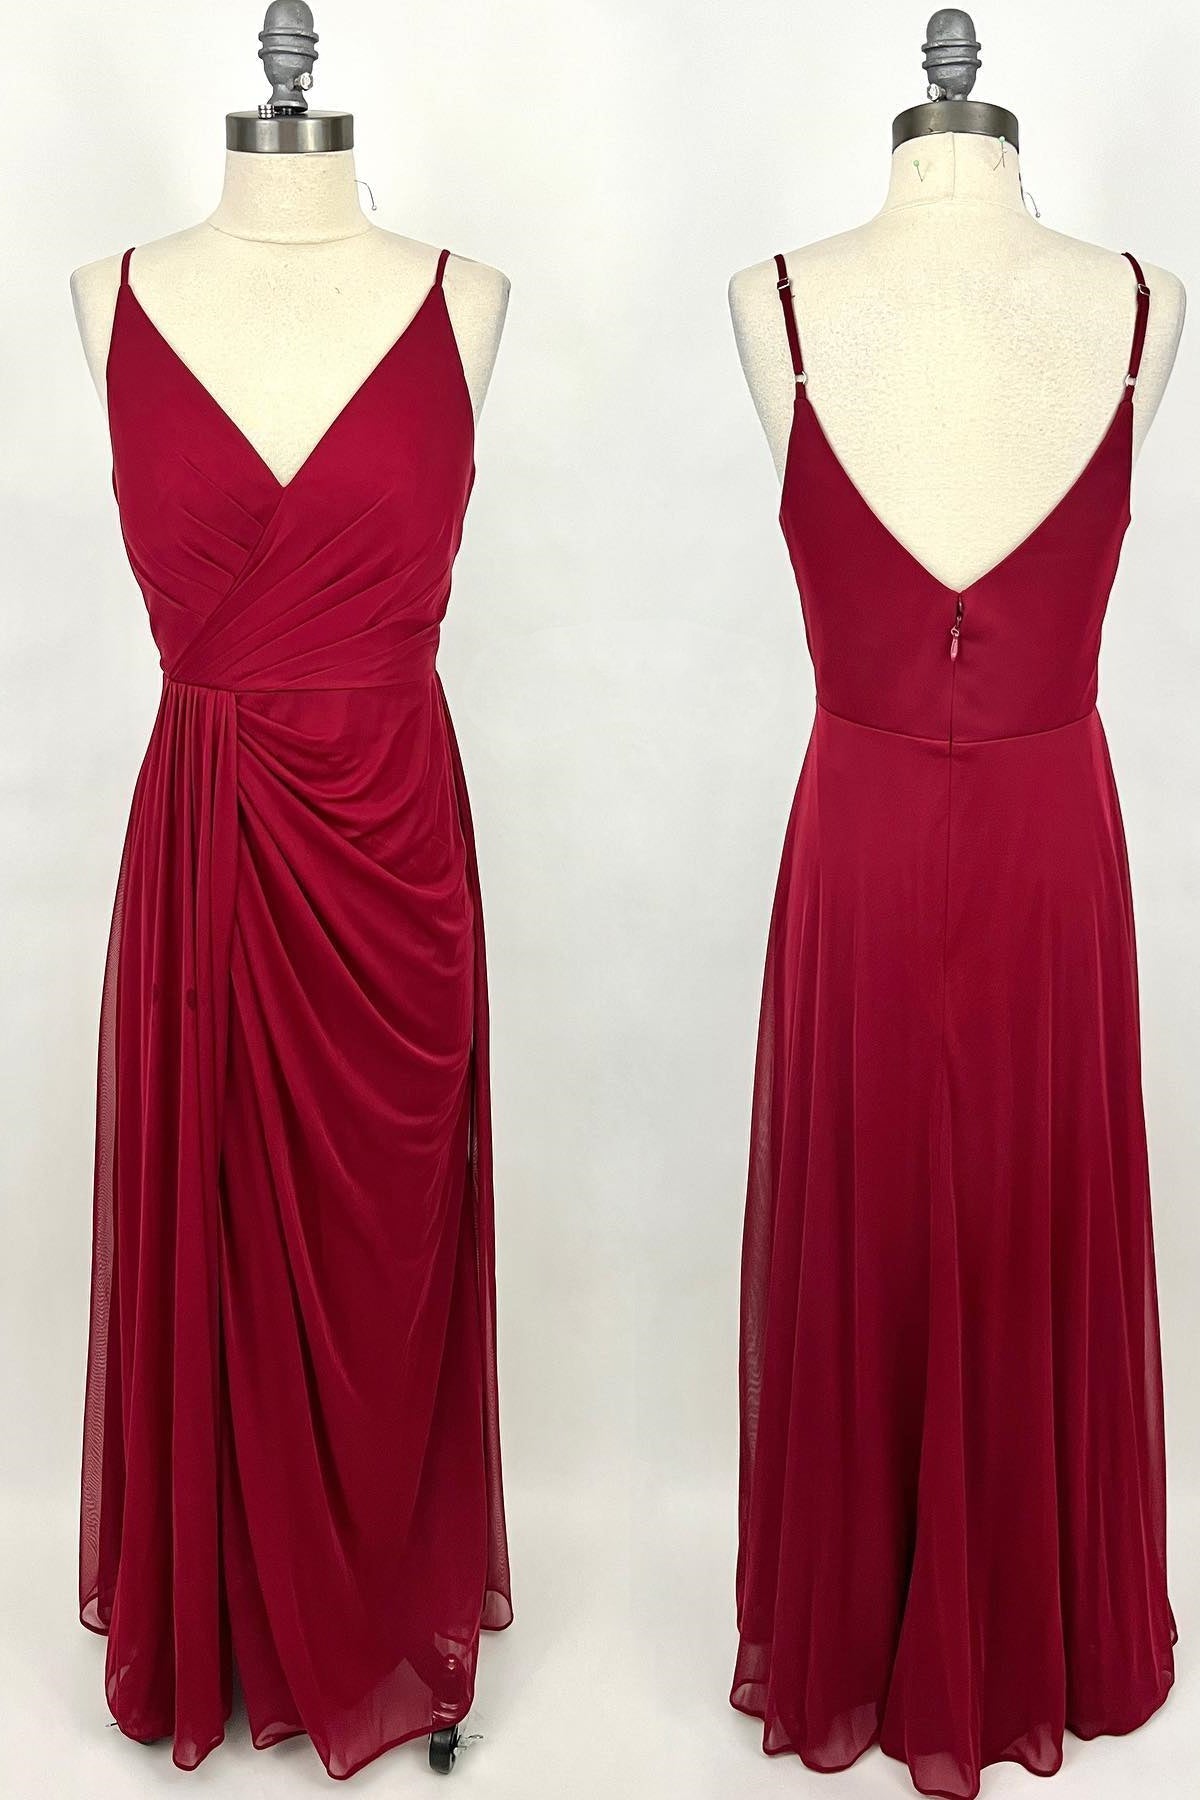 Wine Red Ruched V Neck Long Corset Bridesmaid Dress outfit, Homecoming Dresses Classy